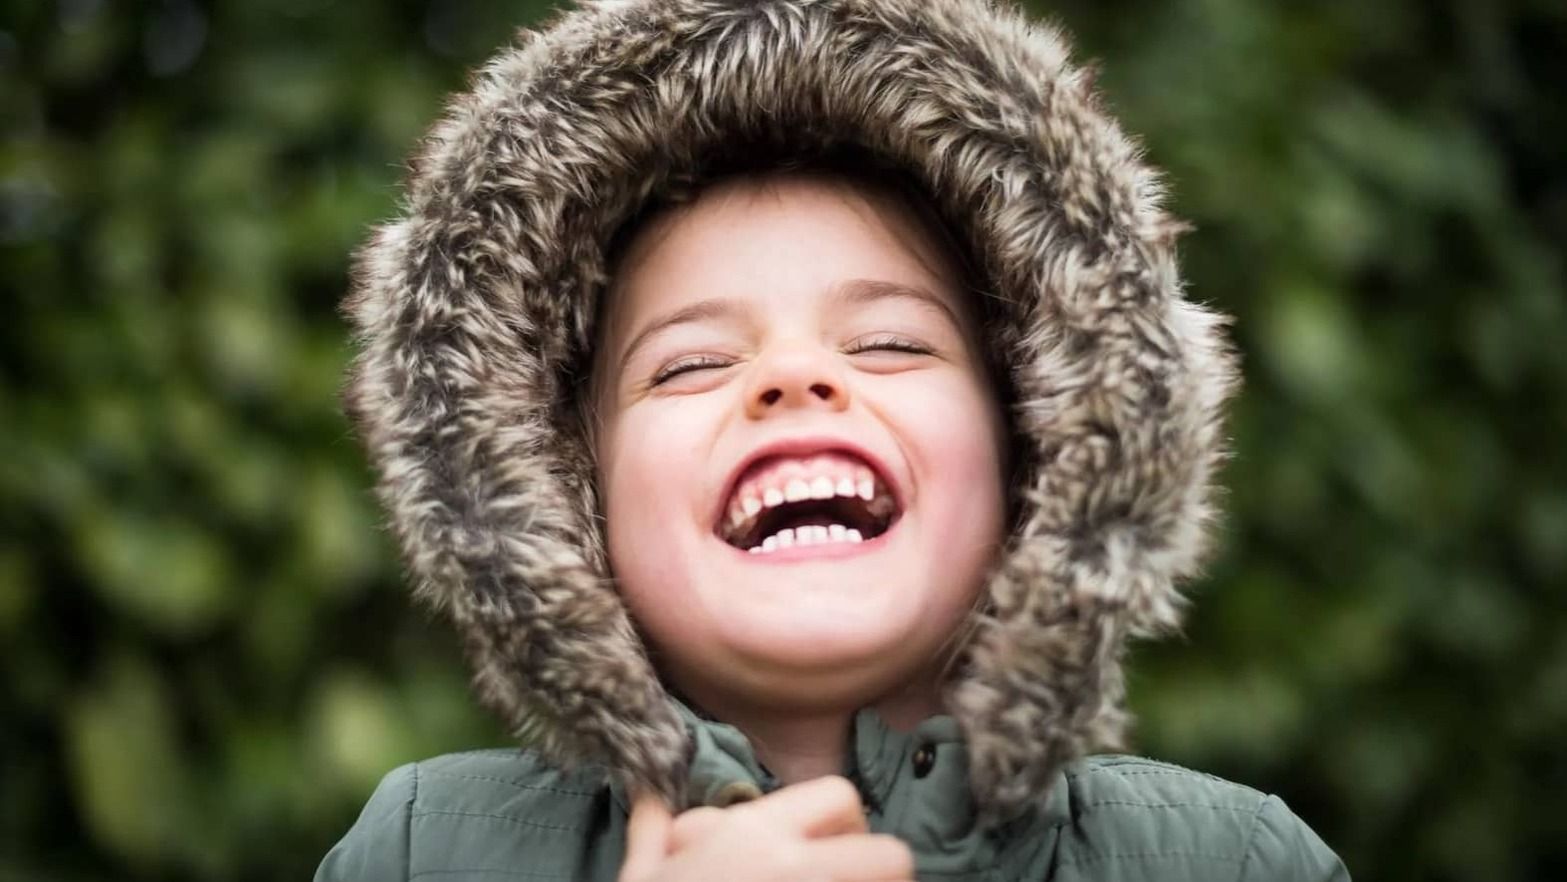 How to Build a Child's Confidence in 5 Proven Steps